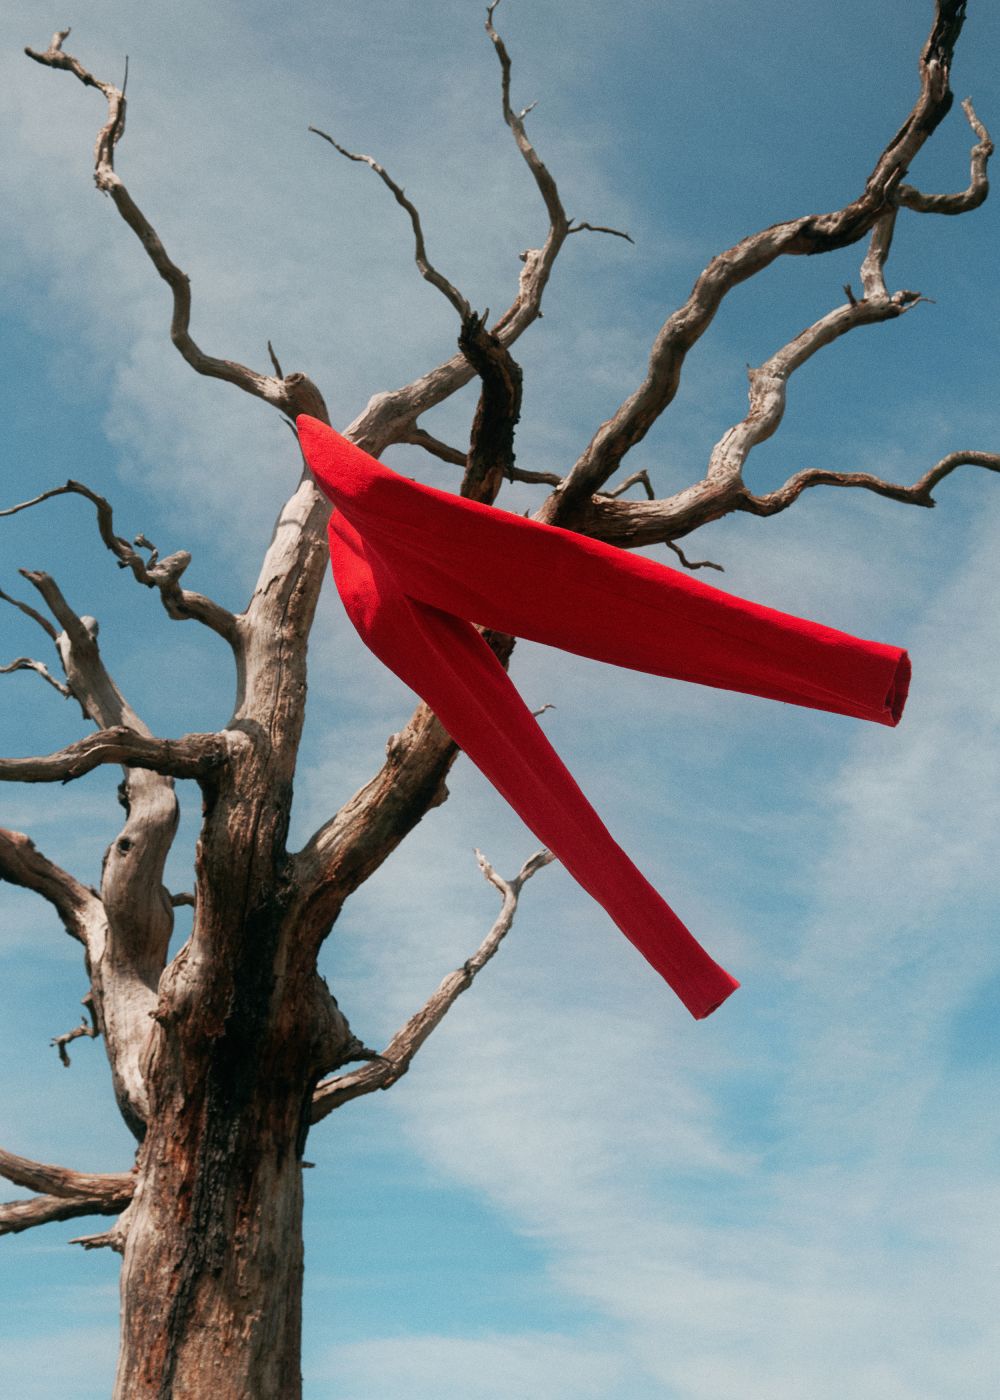 Red tailored trousers hanging from bare tree. Camera directed up towards blue sky.